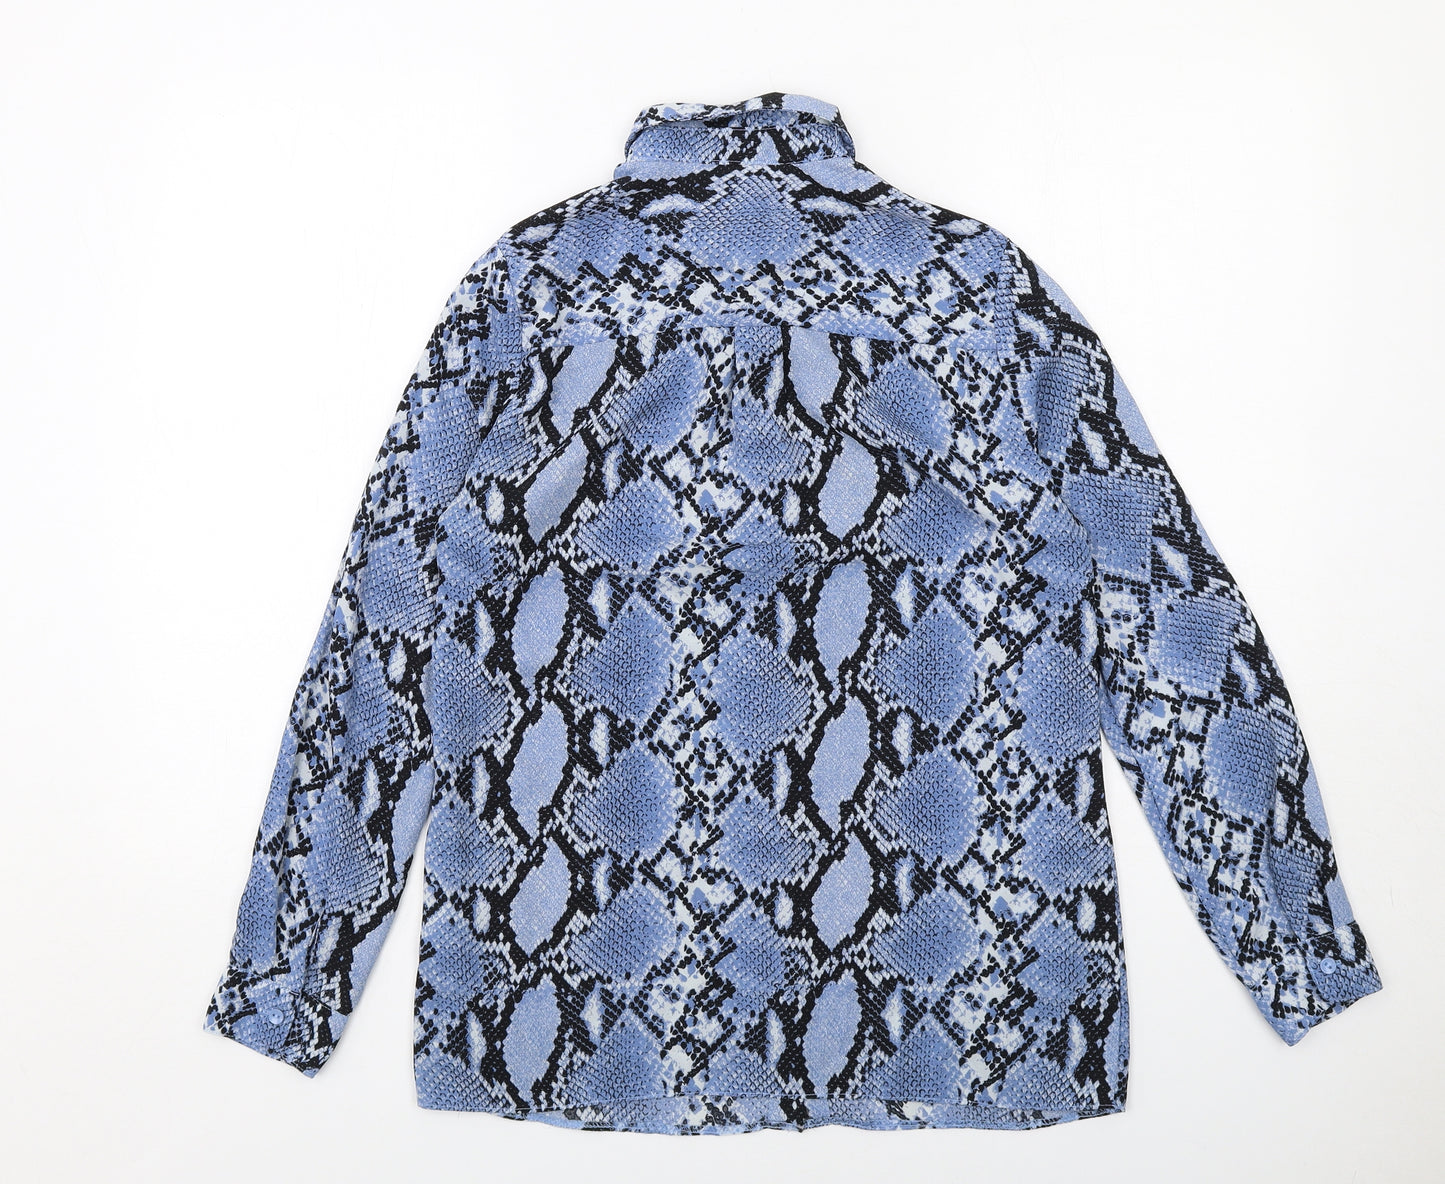 New Look Womens Blue Animal Print Polyester Basic Button-Up Size 10 Collared - Snake Skin Print